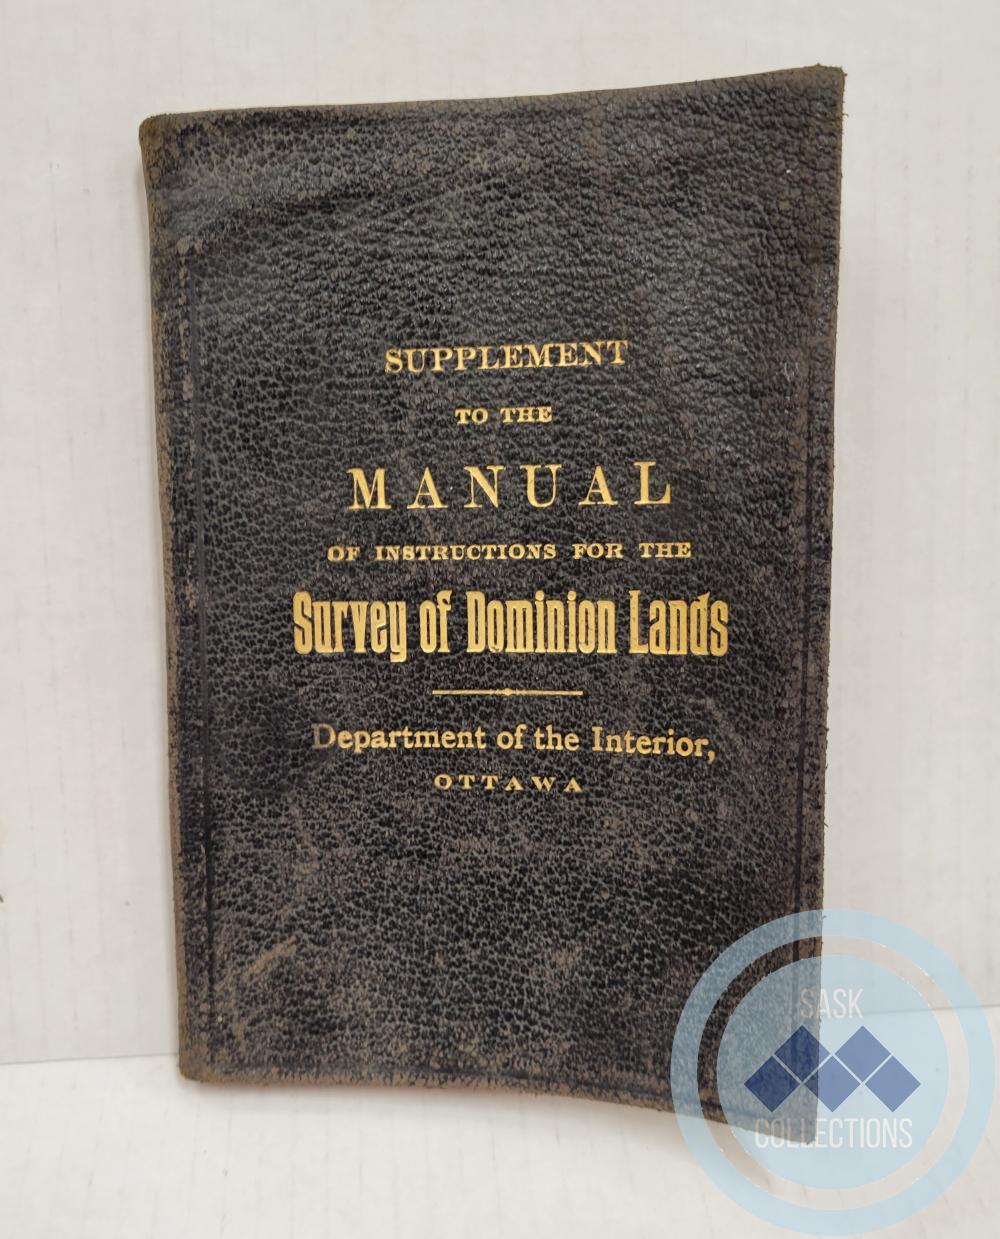 Supplement to the Manual of Instructions for the Survey of Dominion Lands - Department of the Interior, Ottawa (Astronomical, Geodetic, and Other Tables)